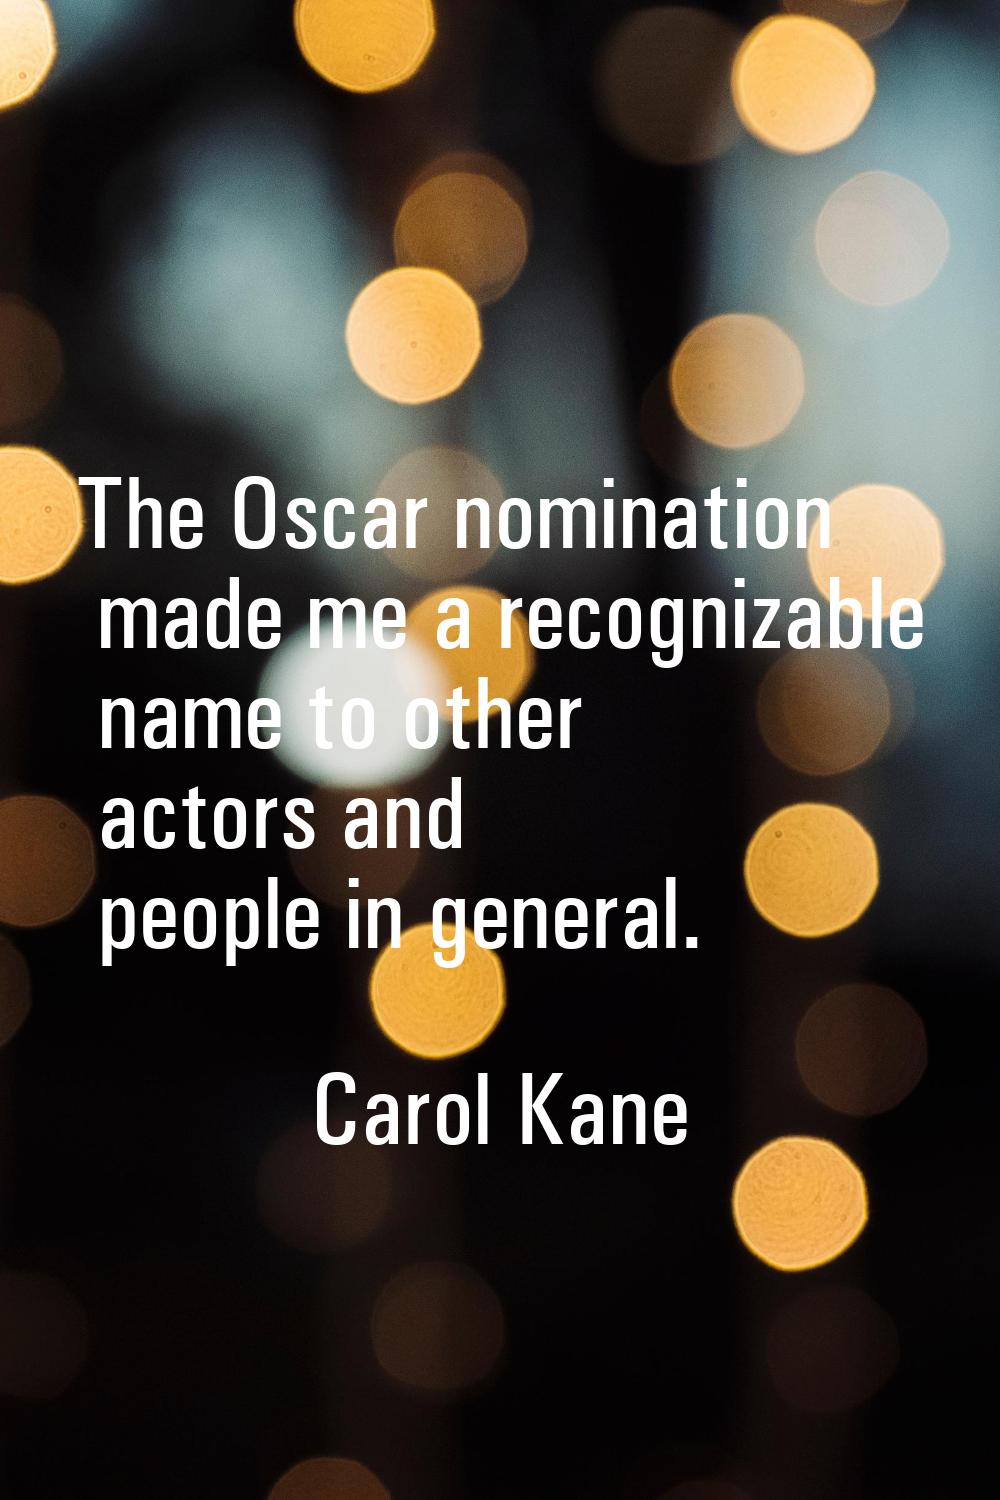 The Oscar nomination made me a recognizable name to other actors and people in general.